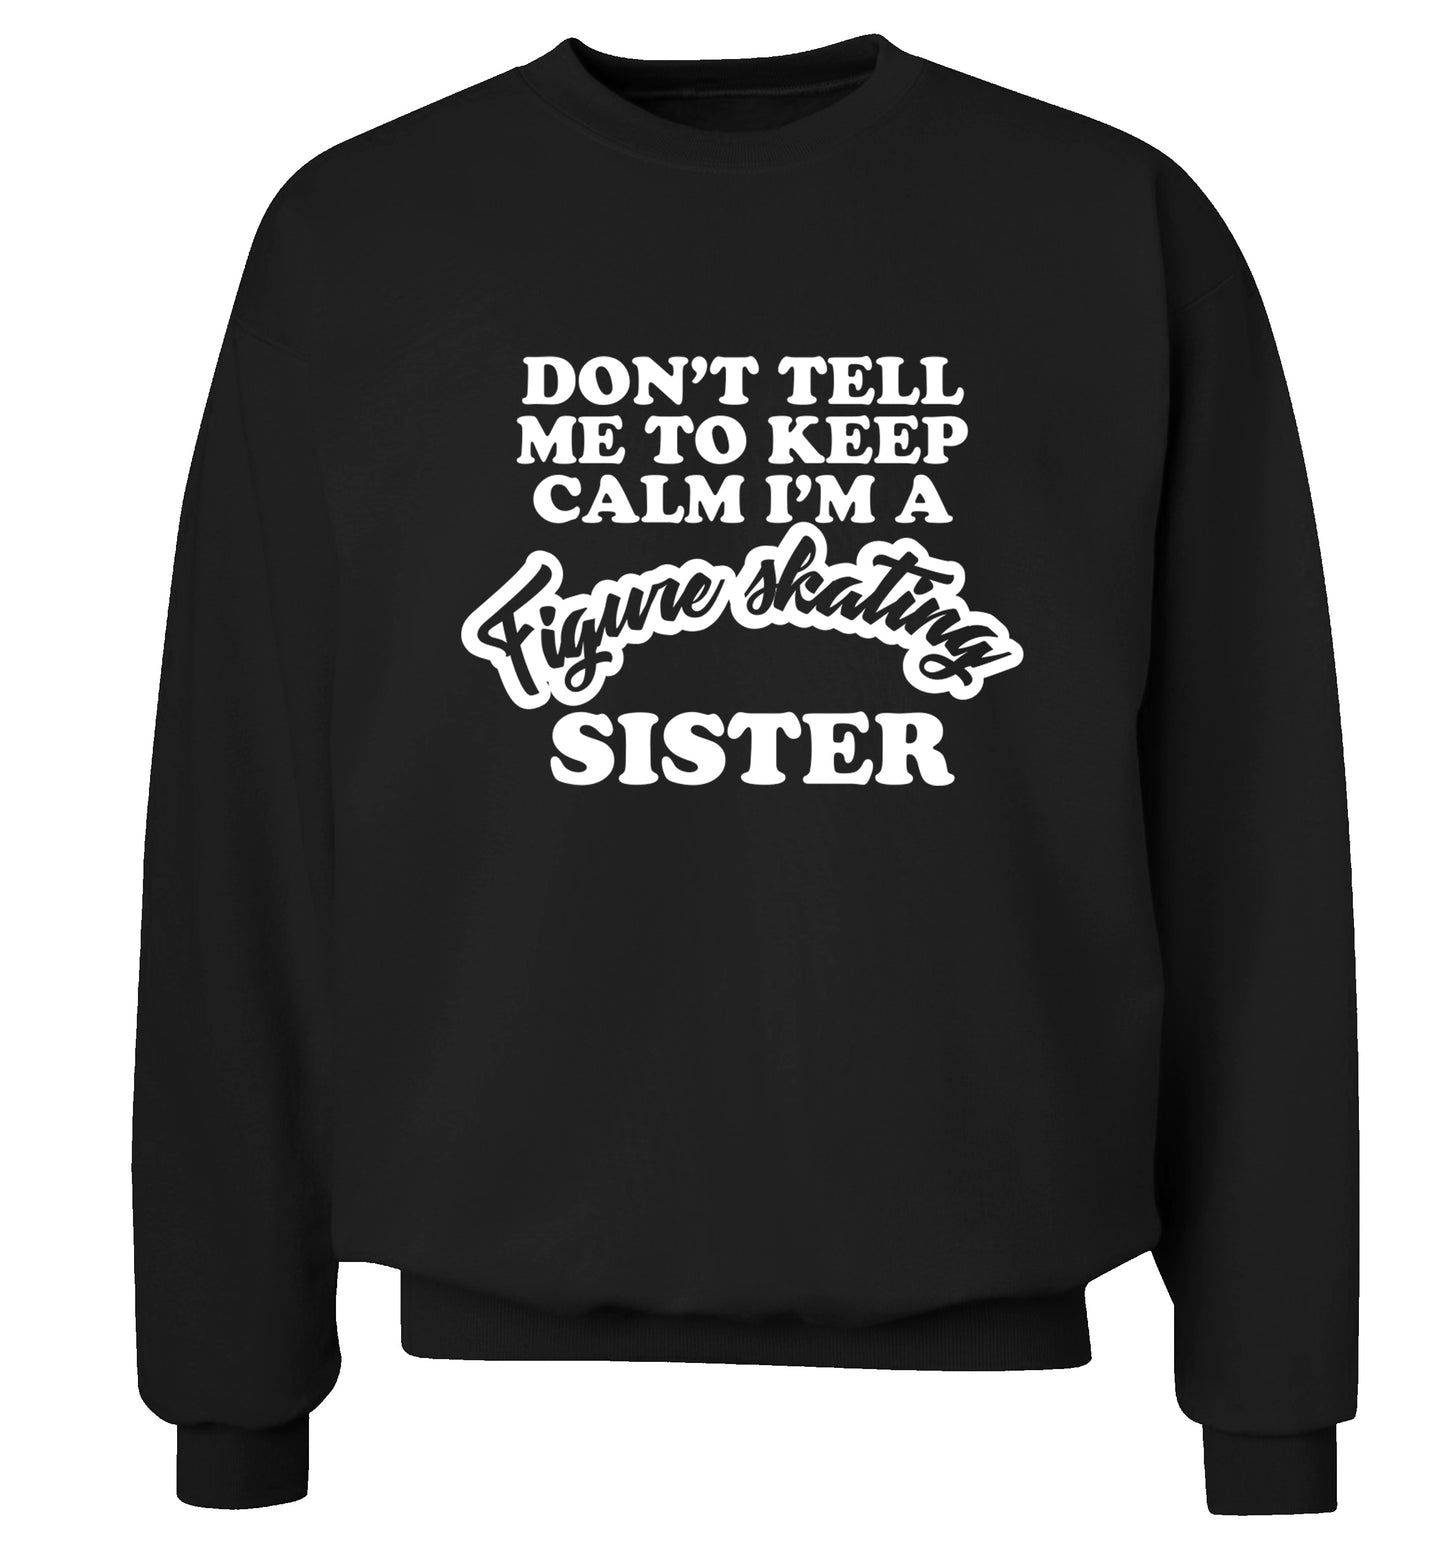 Don't tell me to keep calm I'm a figure skating sister Adult's unisexblack Sweater 2XL